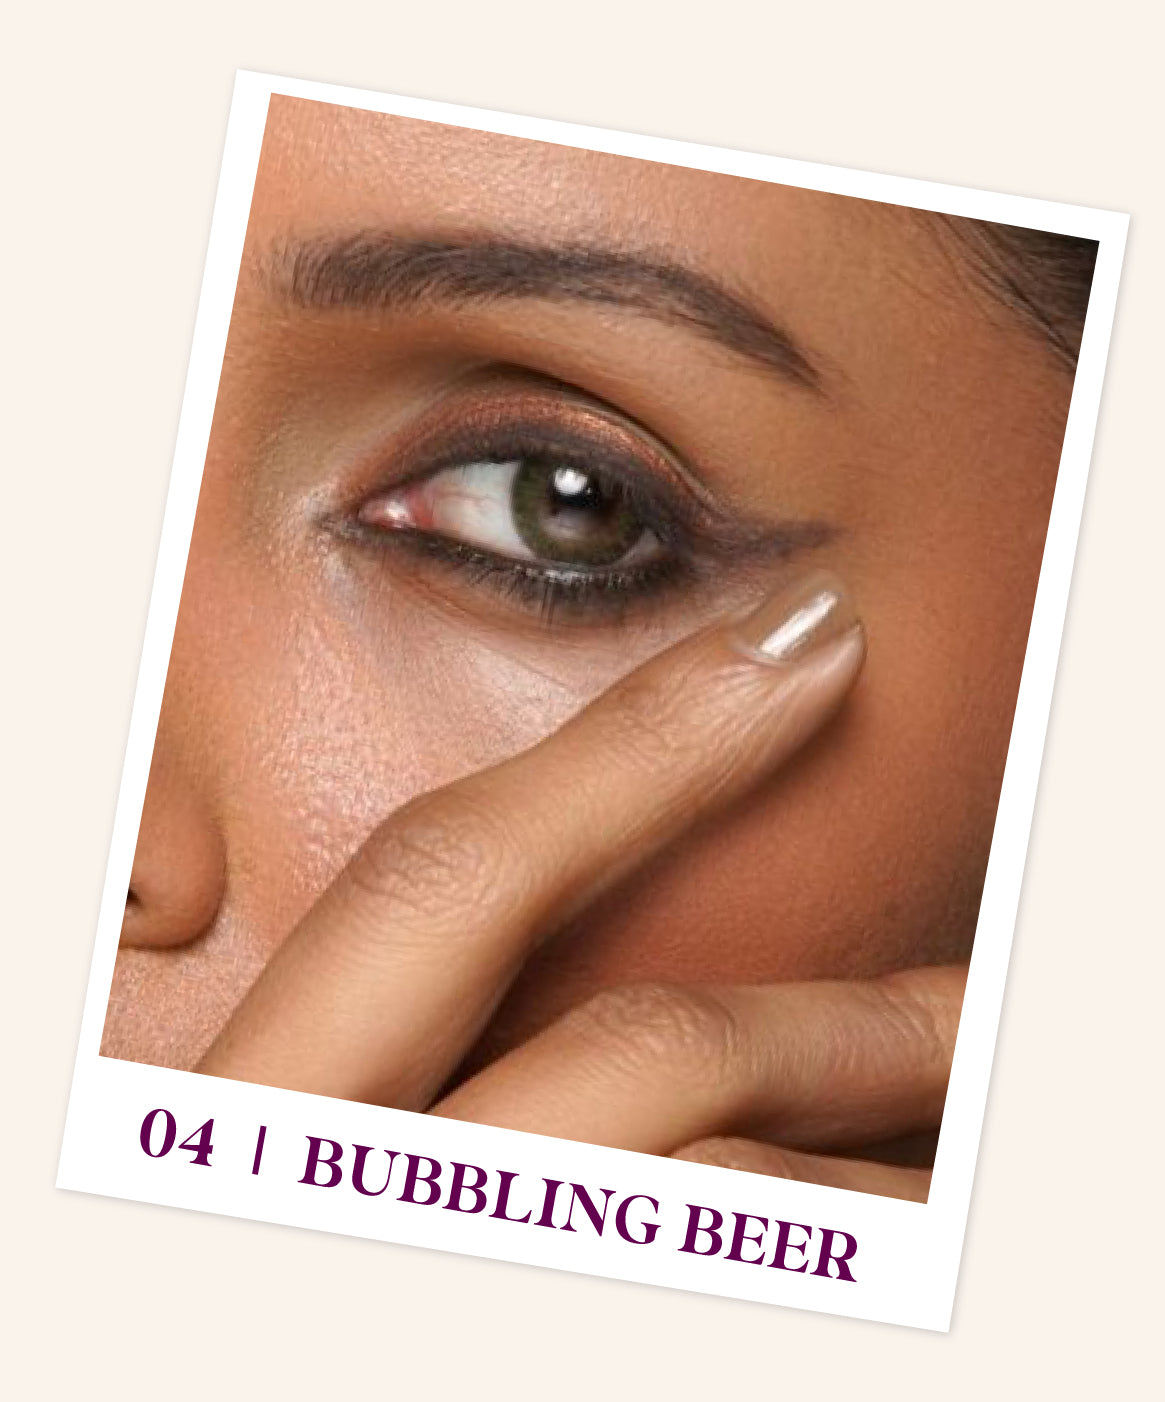 Bubbling Beer 04 - Chocolate brown shade & Coppery gold